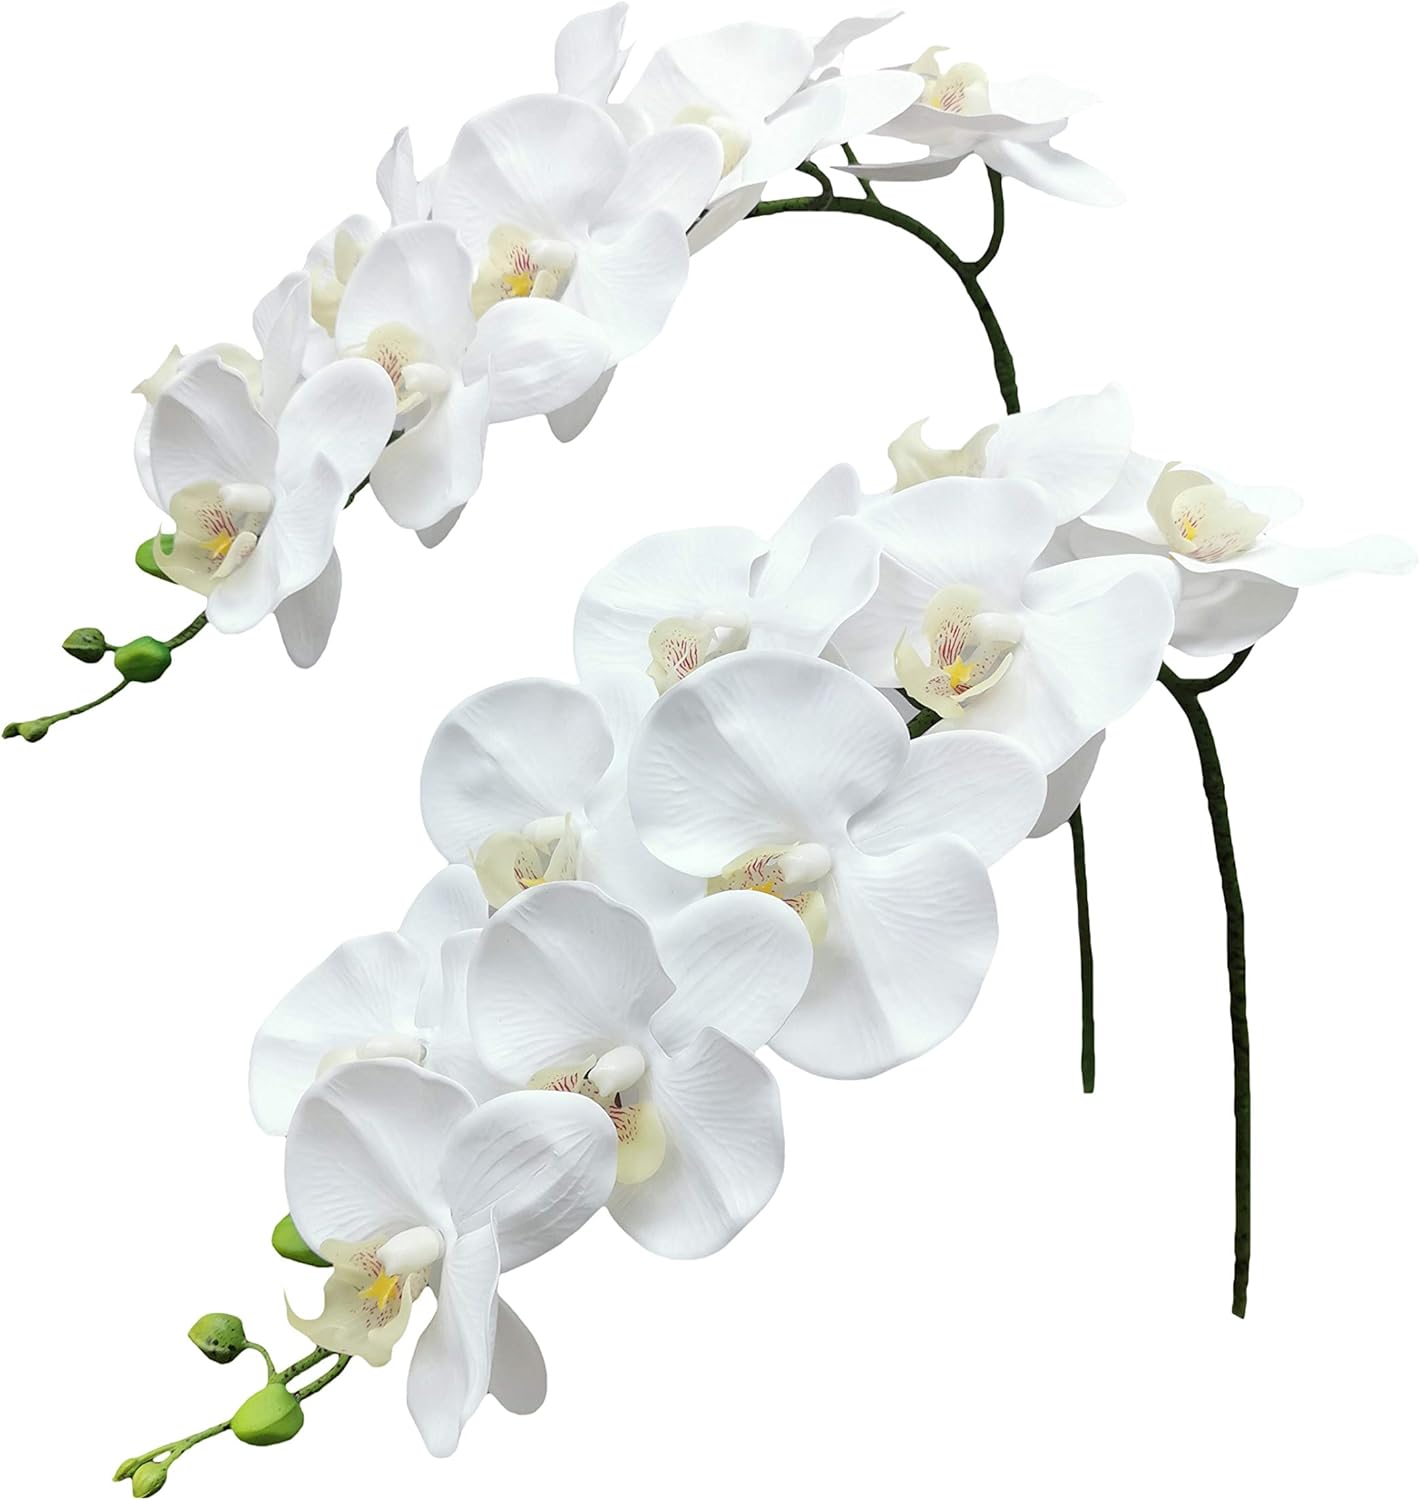 Real Touch Phalaenopsis Orchid Stem - White -2 PCS